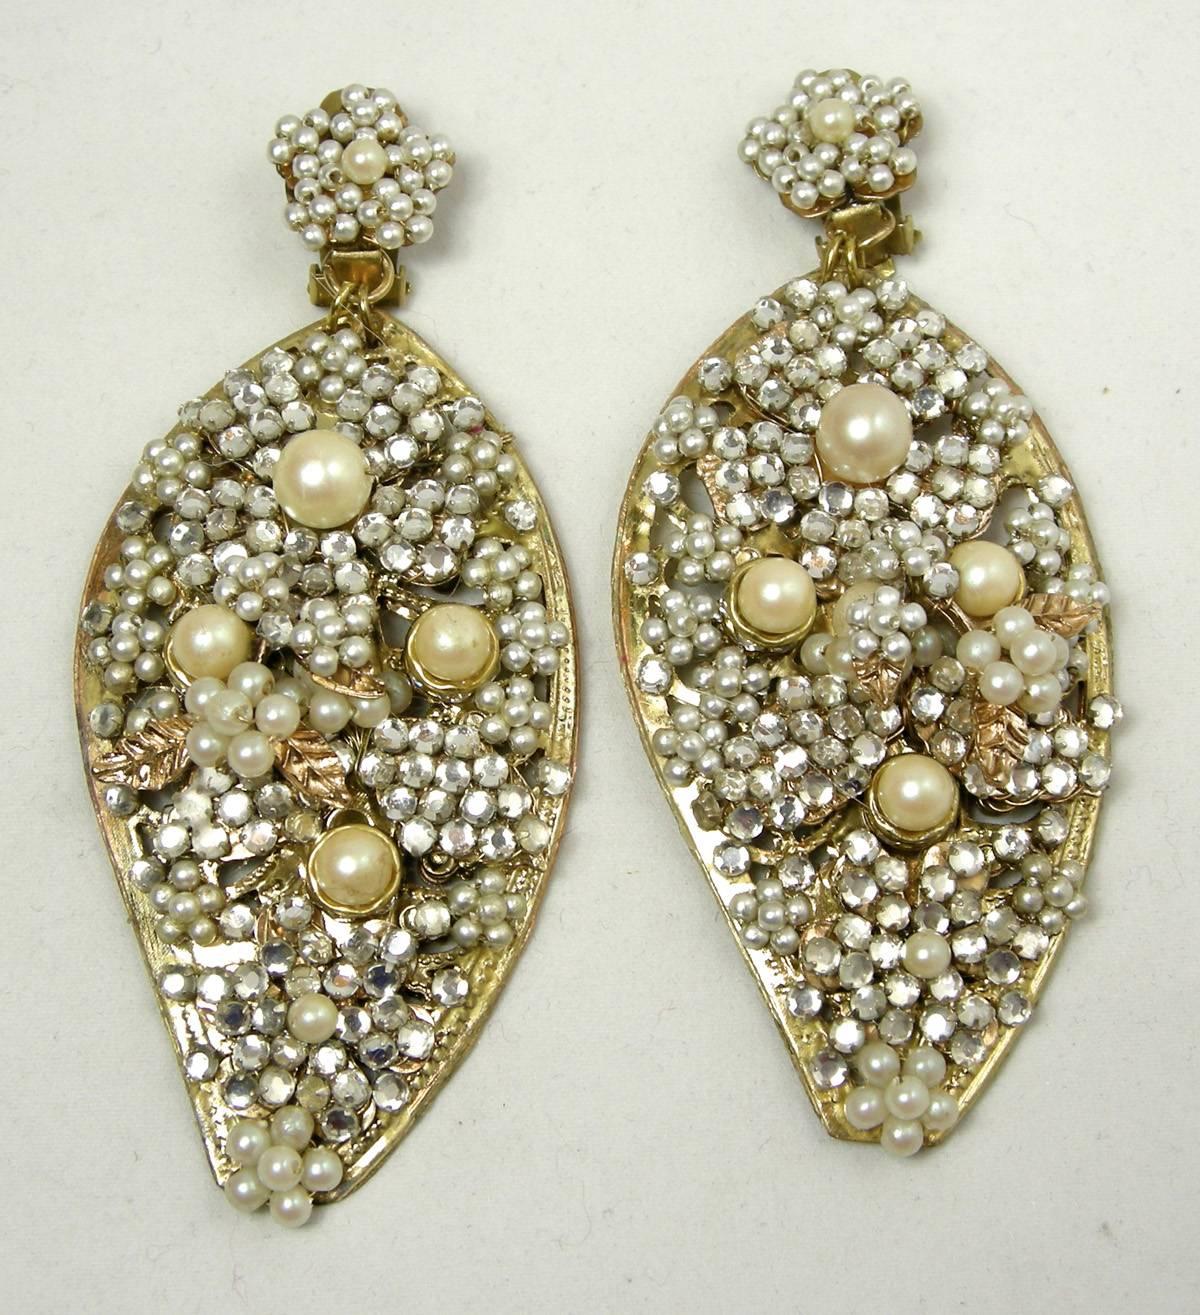 These signed DeMario clip earrings look like Haskell.   It has a faux pearl floral top that connects to a long tear shaped chandelier drop.  The drop has tiny faux pearls accentuated with rhinestones, larger pearls and gold tone leaves.  The